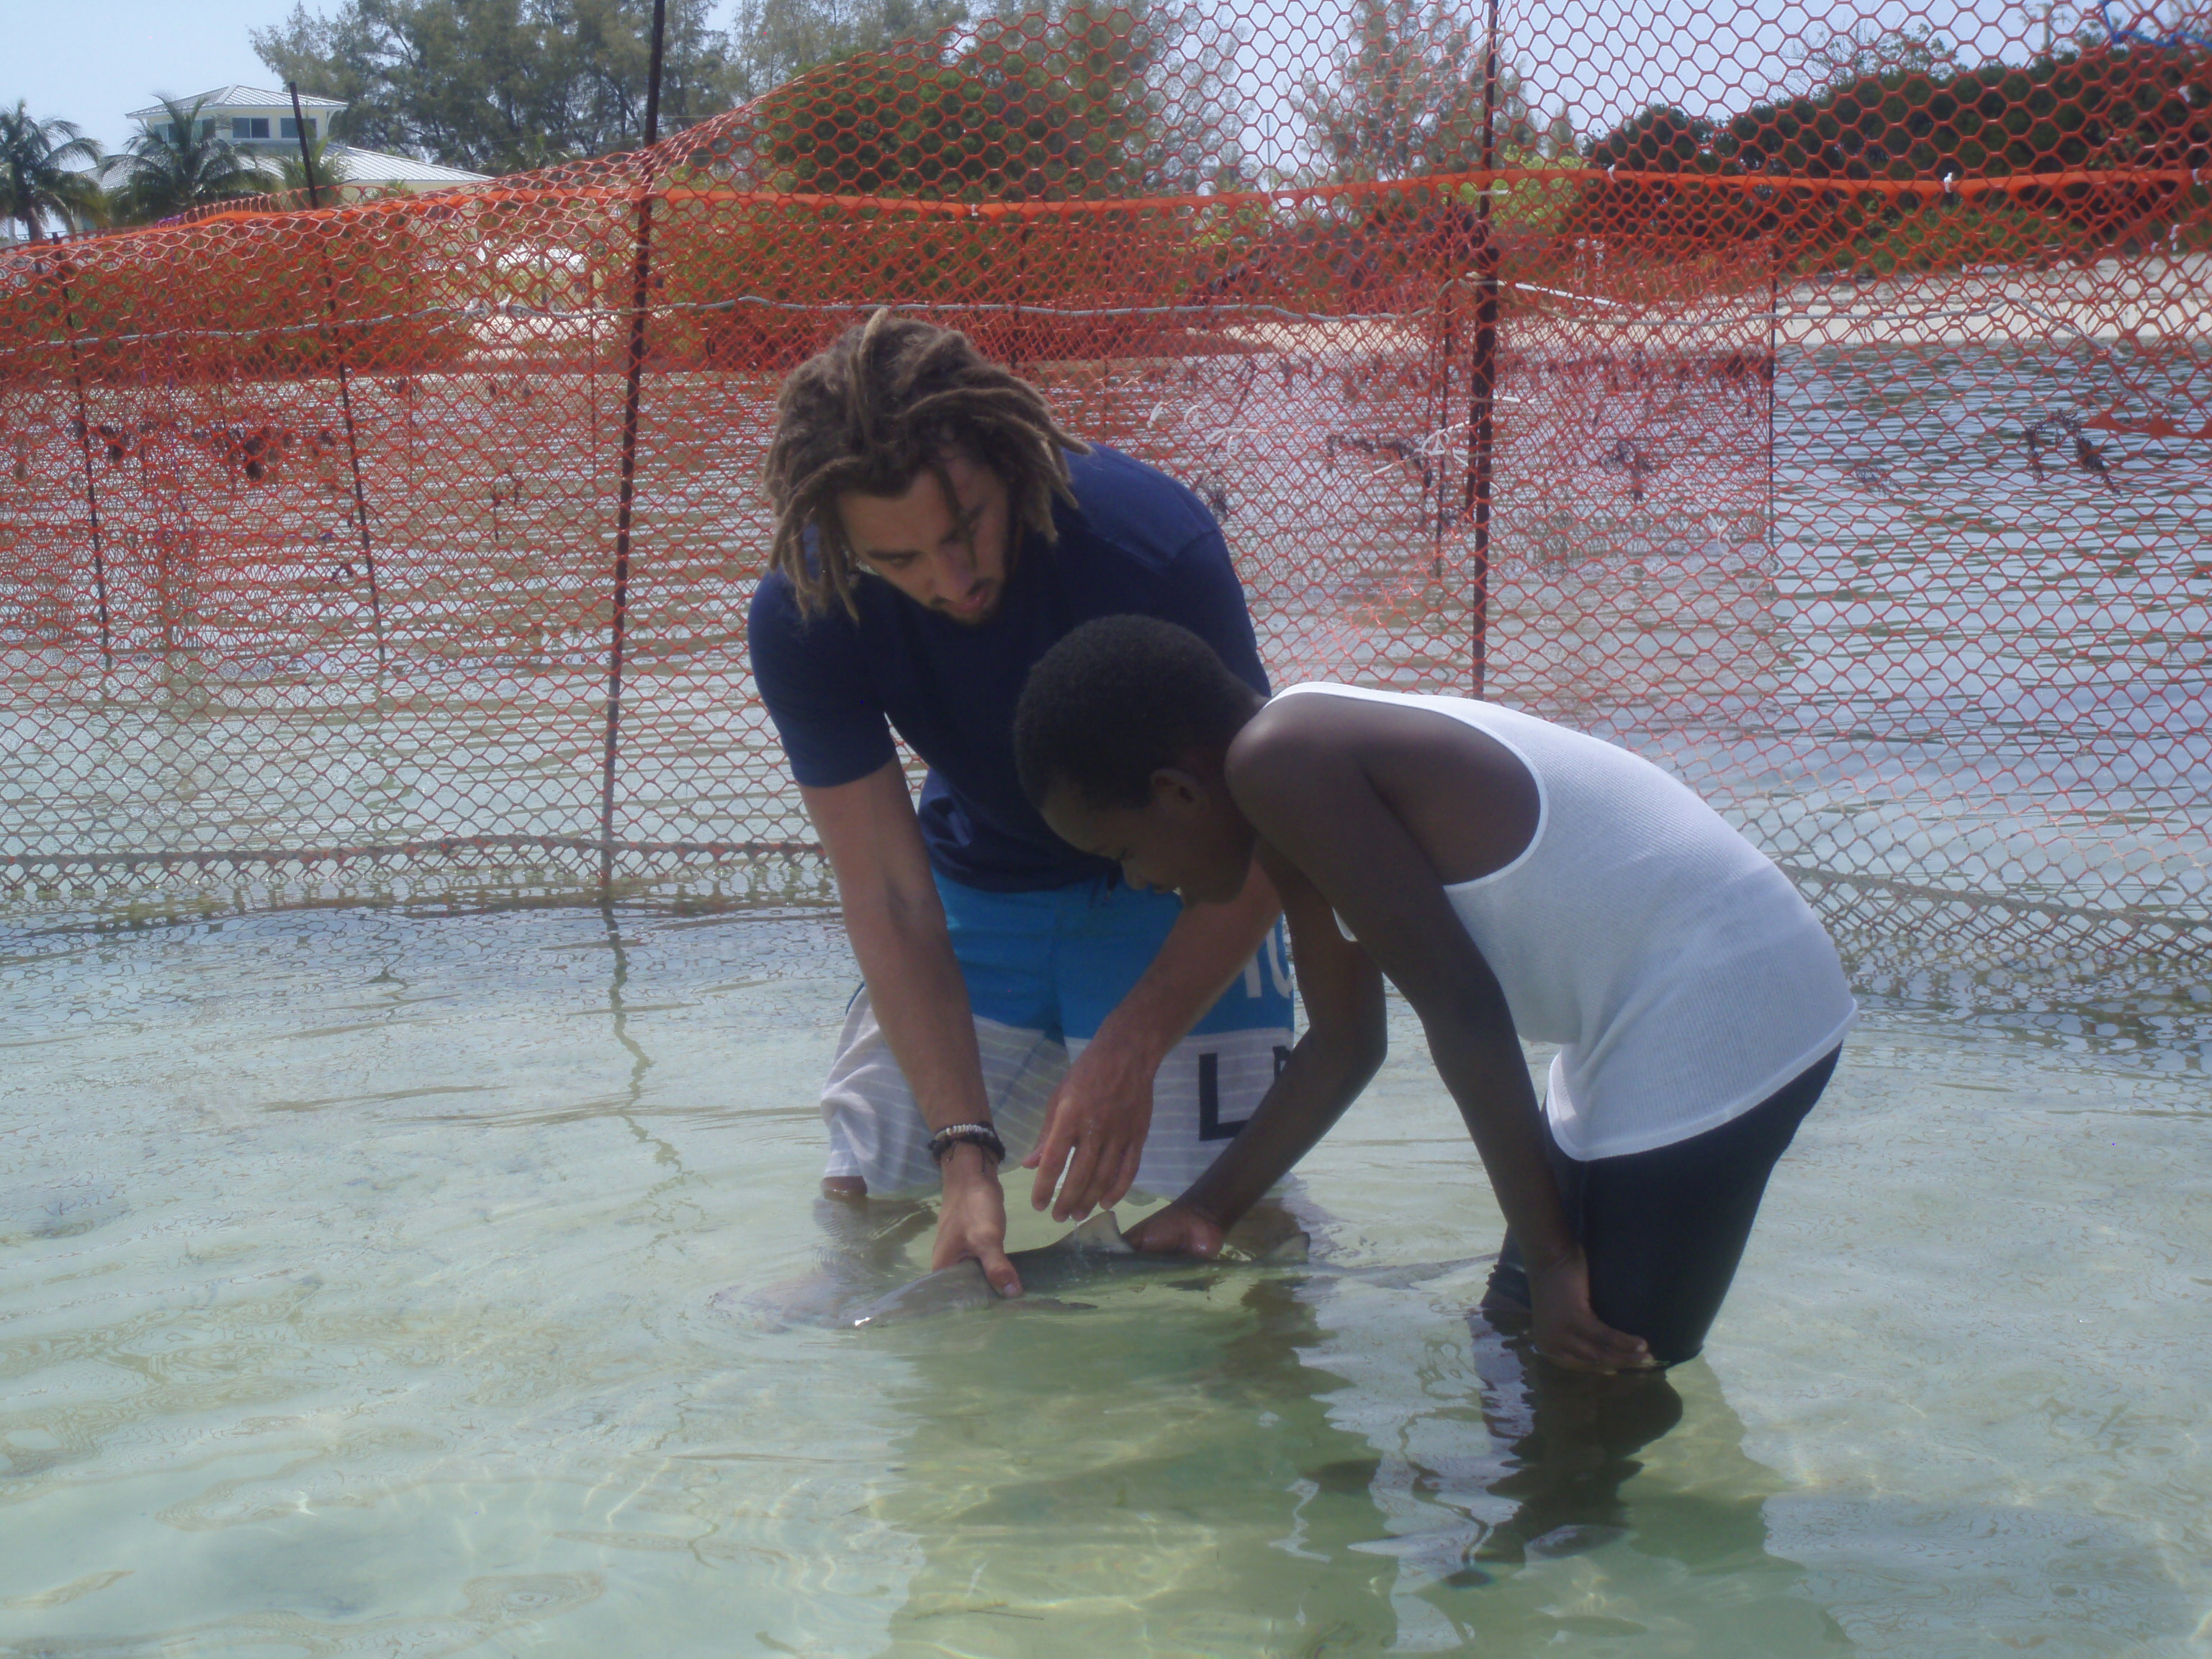  Brian Jr came to the Bimini Biological Field Station for a day to experience life as a marine biologist. Part of his day involved interacting with juvenile lemon sharks as pictured above. Photo by: Christopher Lang